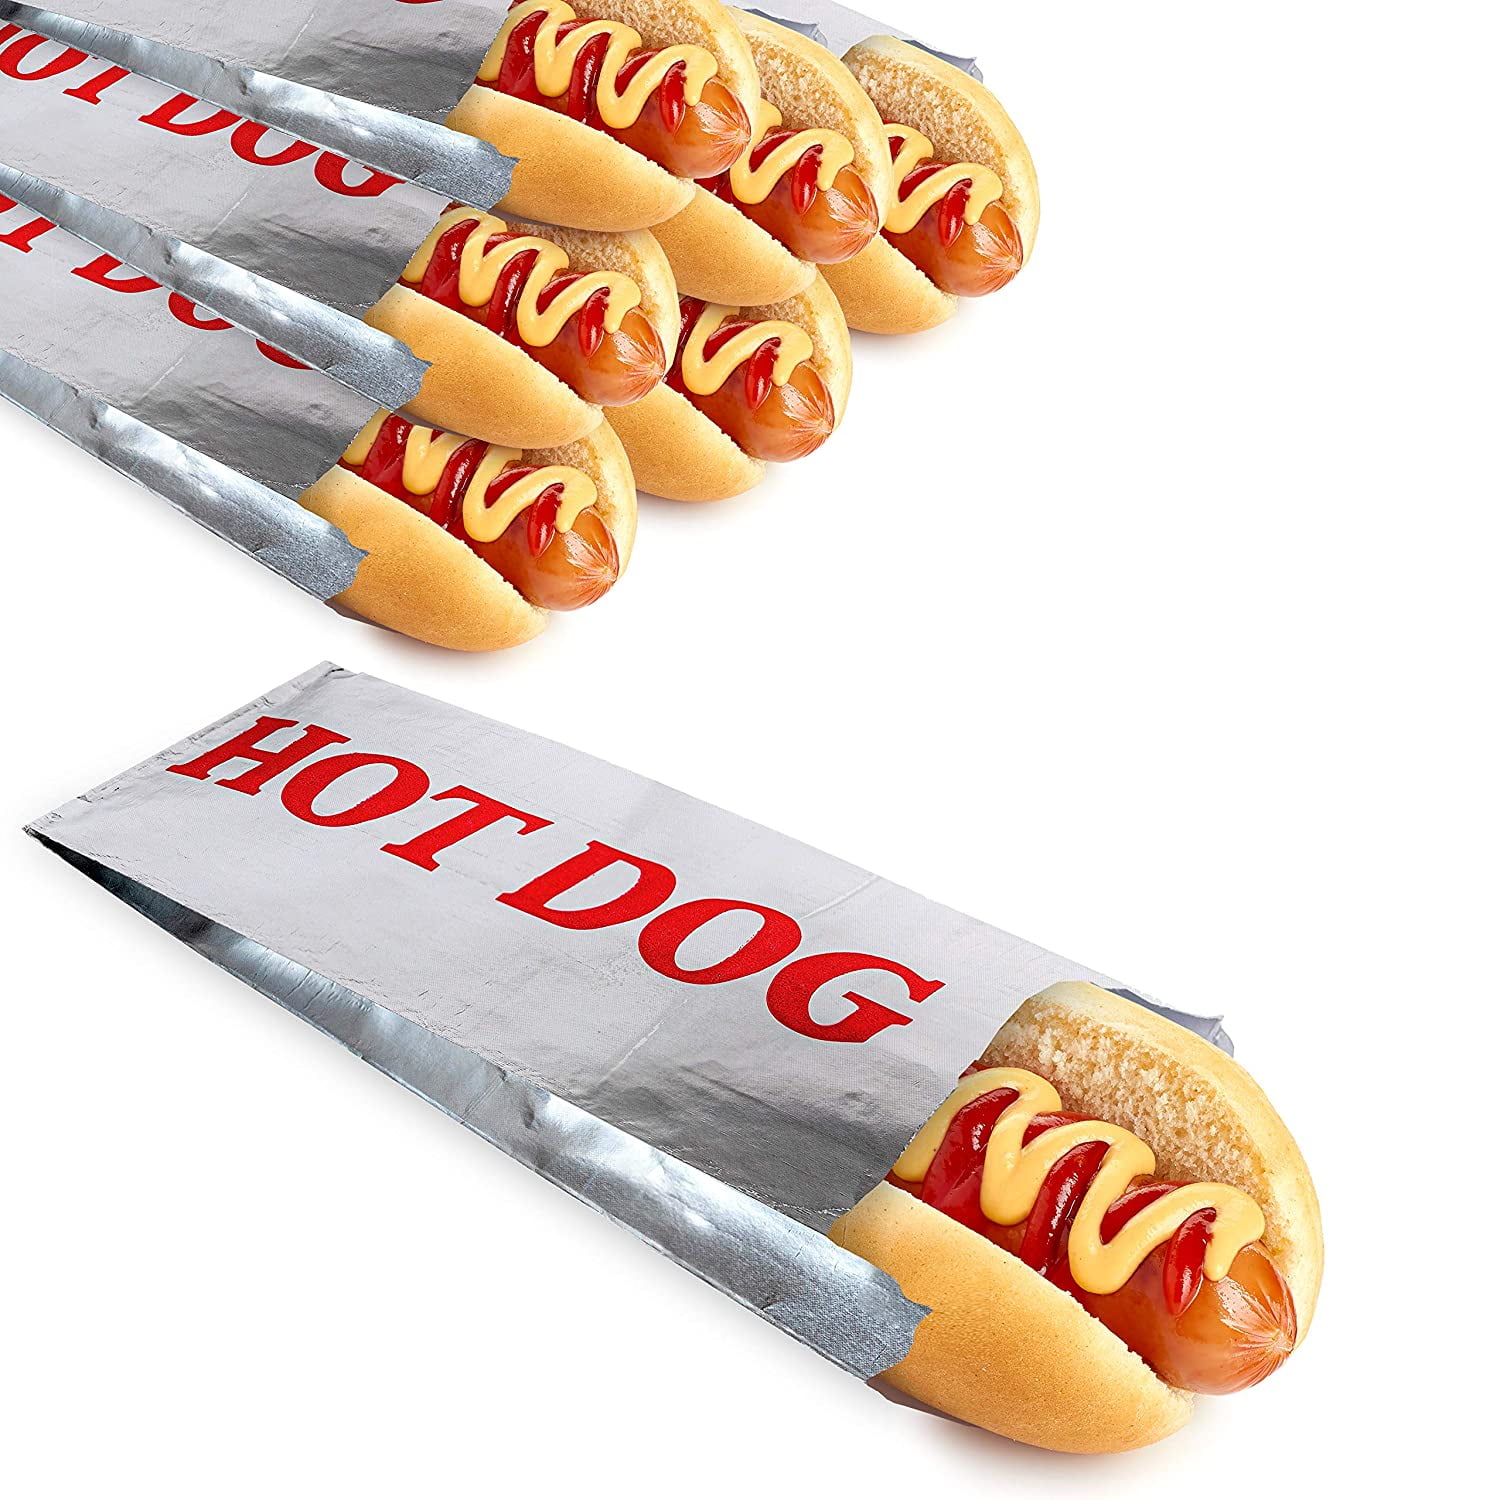 #S4630 1000 Commercial FOIL HOT DOG BAGS Approx 3-1/2" x 1-1/2" x 8-3/4" 